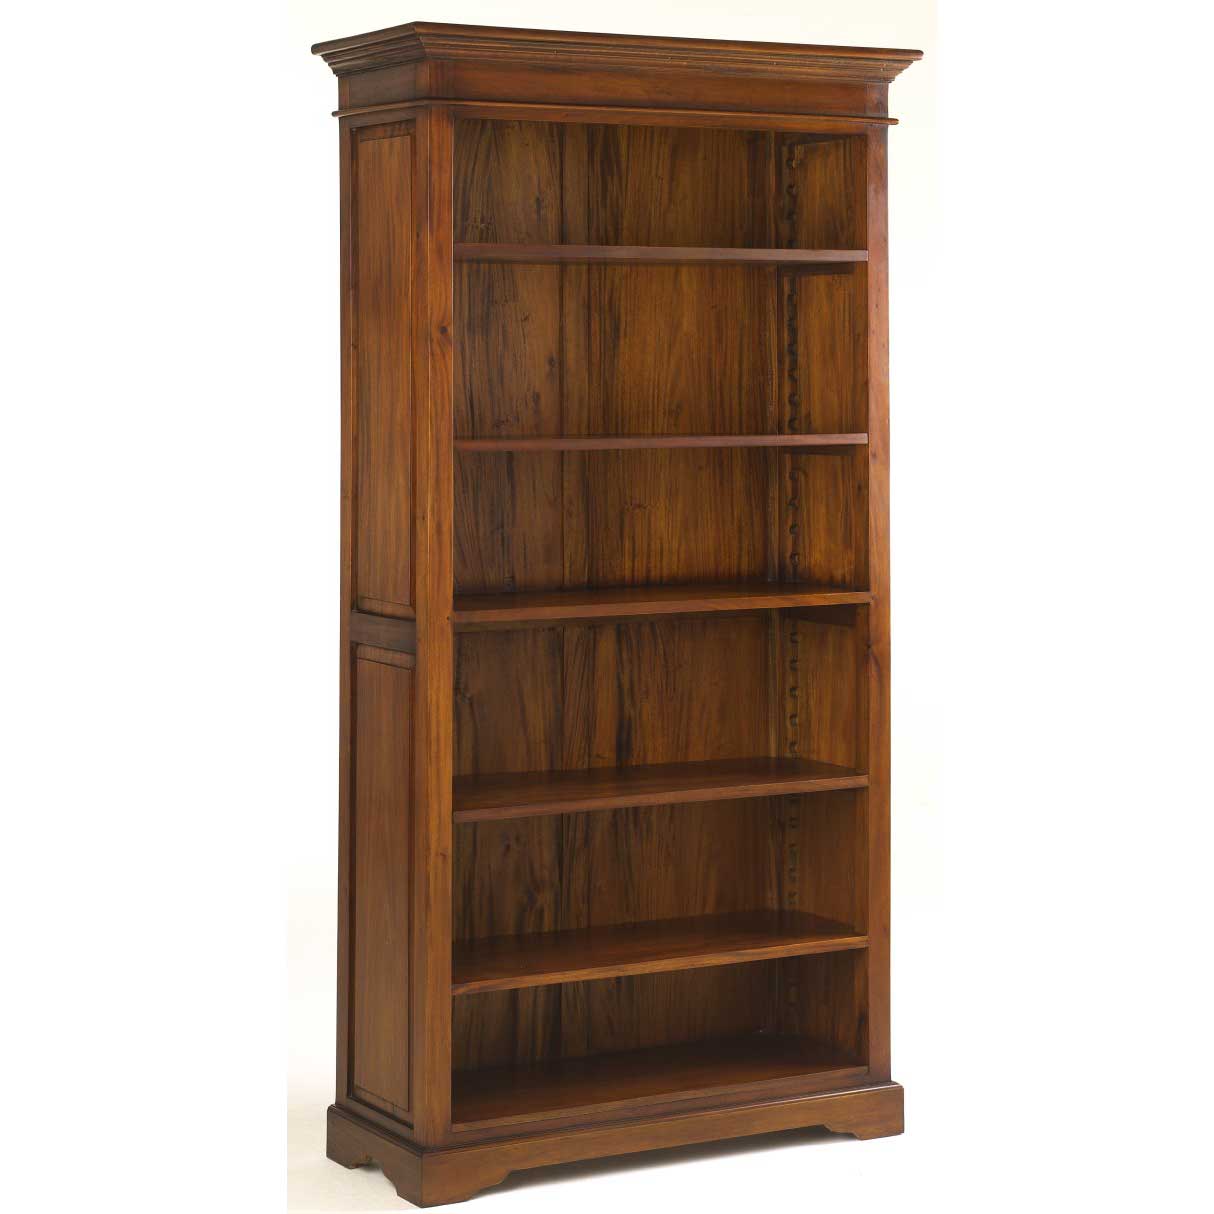 Solid Wood Bookcases for Home Office | Office Furniture